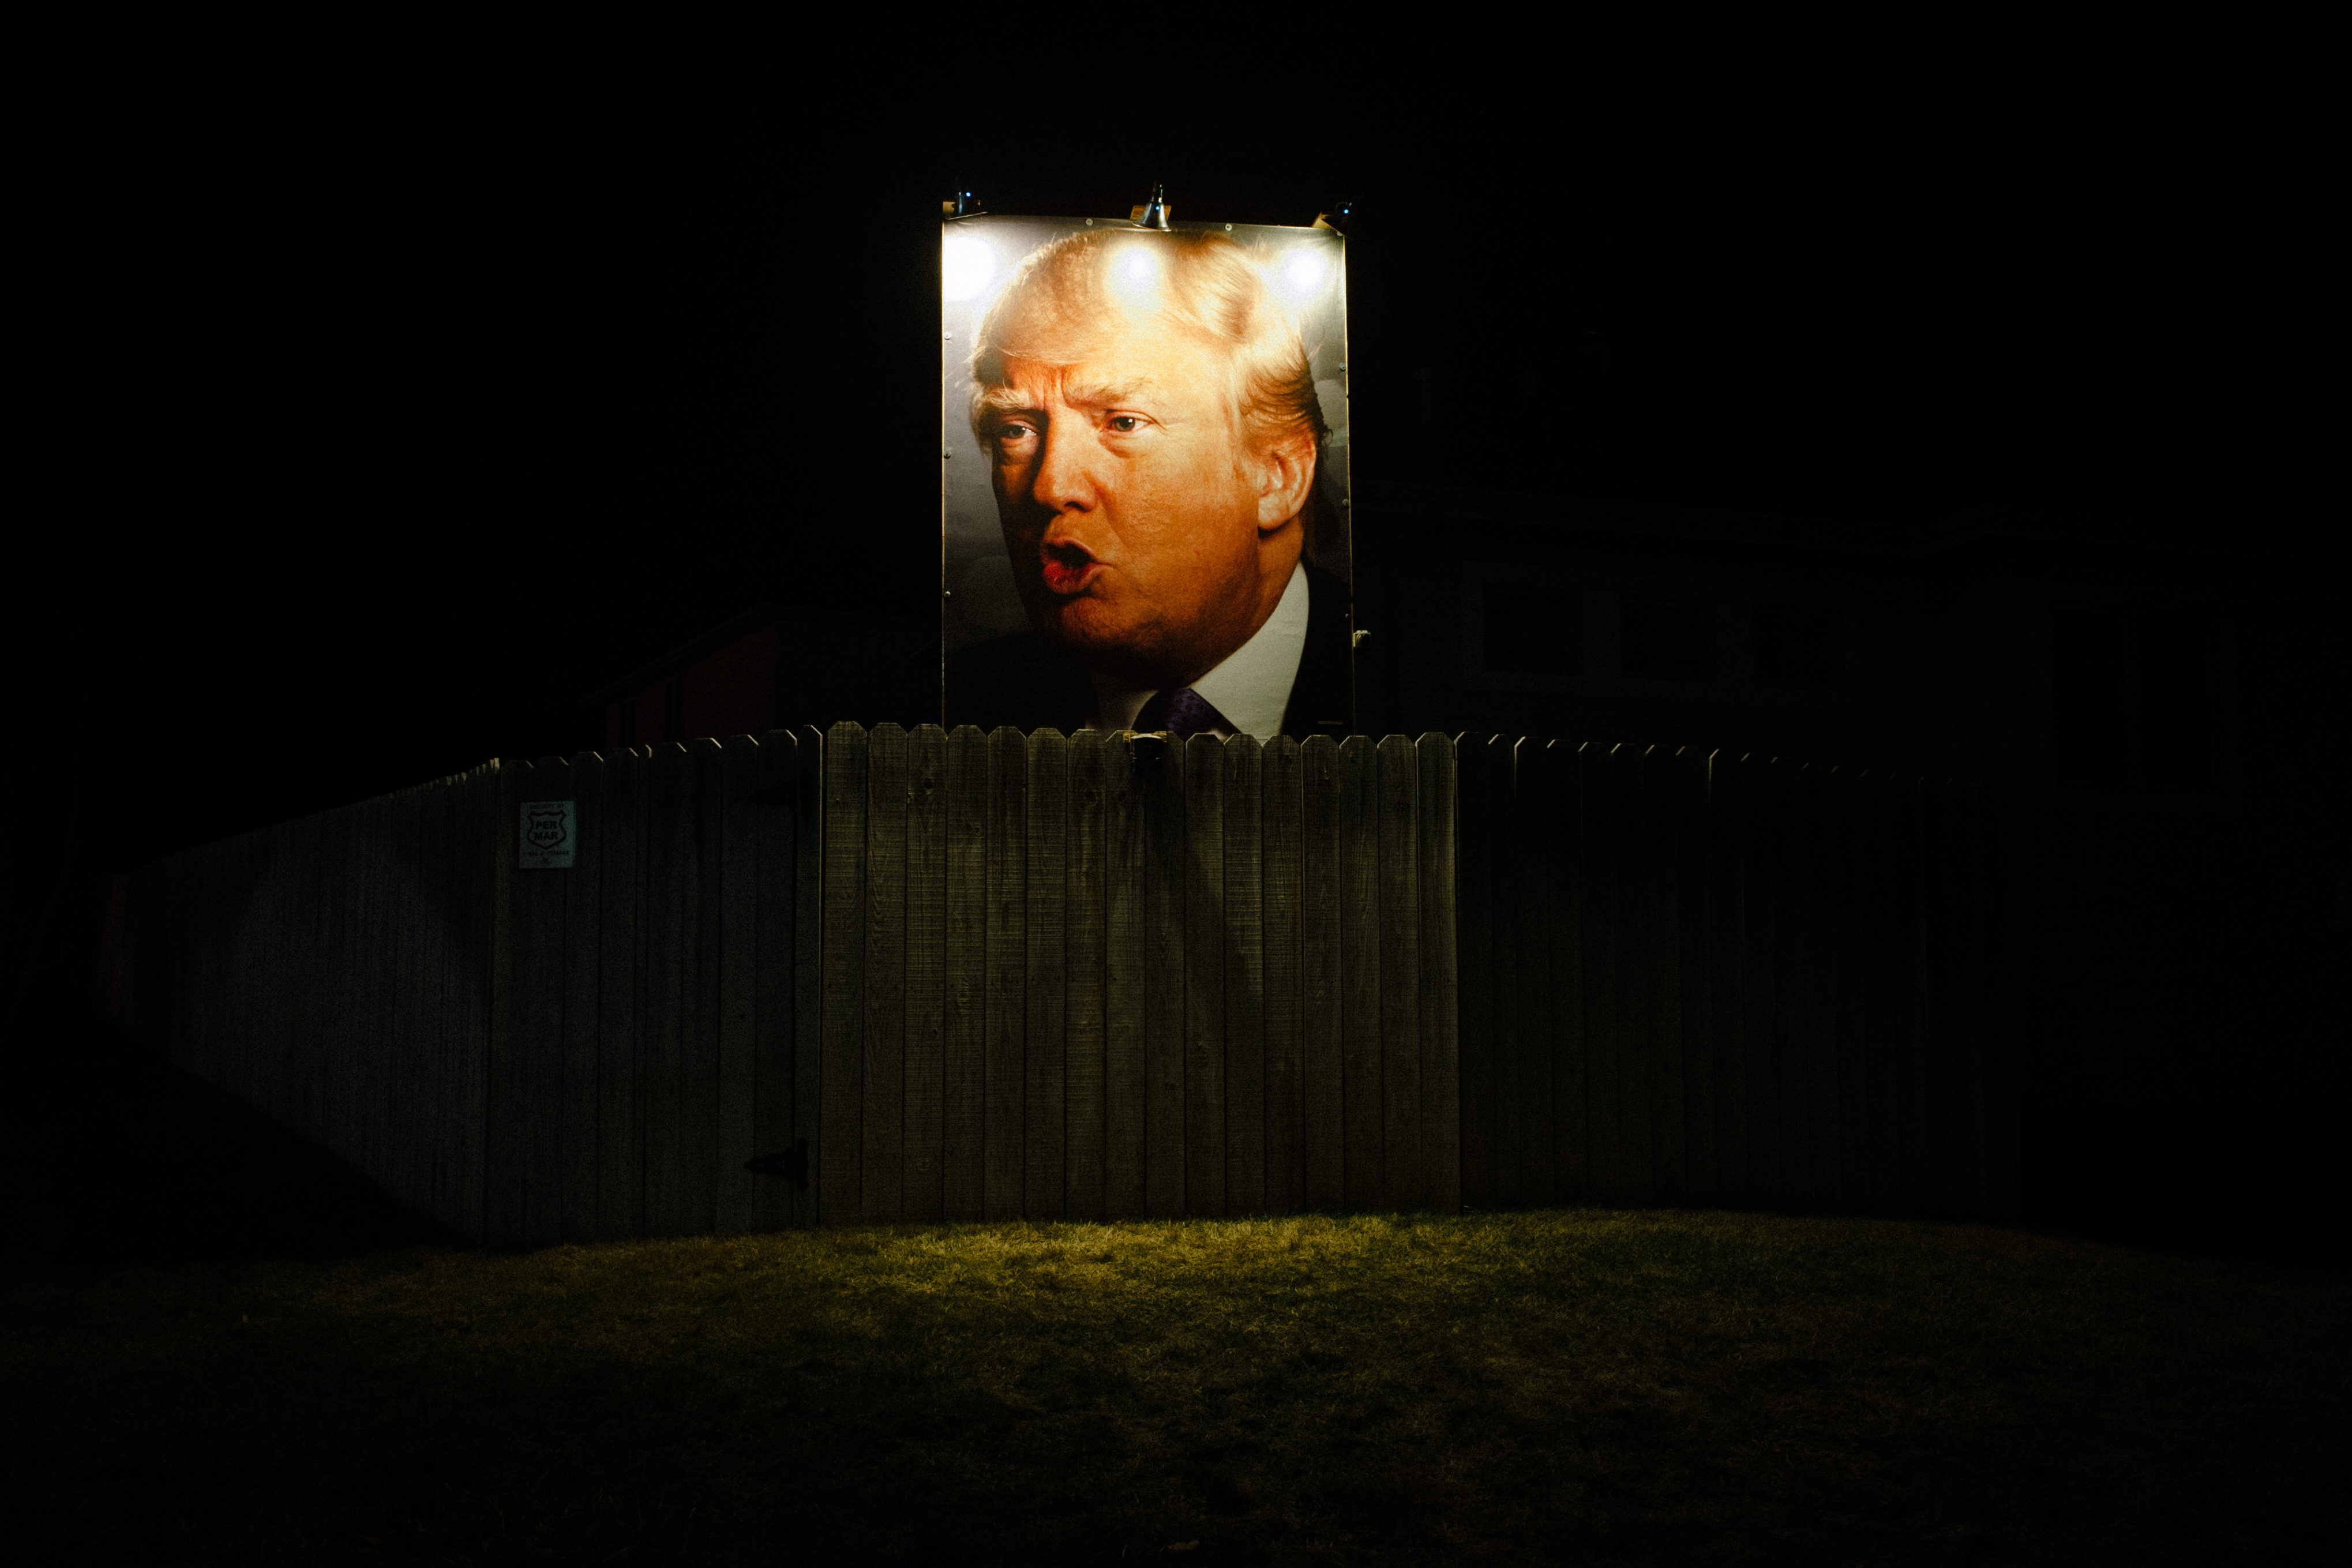 A poster depicting Republican presidential candidate Donald Trump is displayed at the home of George Davey, on Jan. 14, 2016 in Des Moines, Iowa.